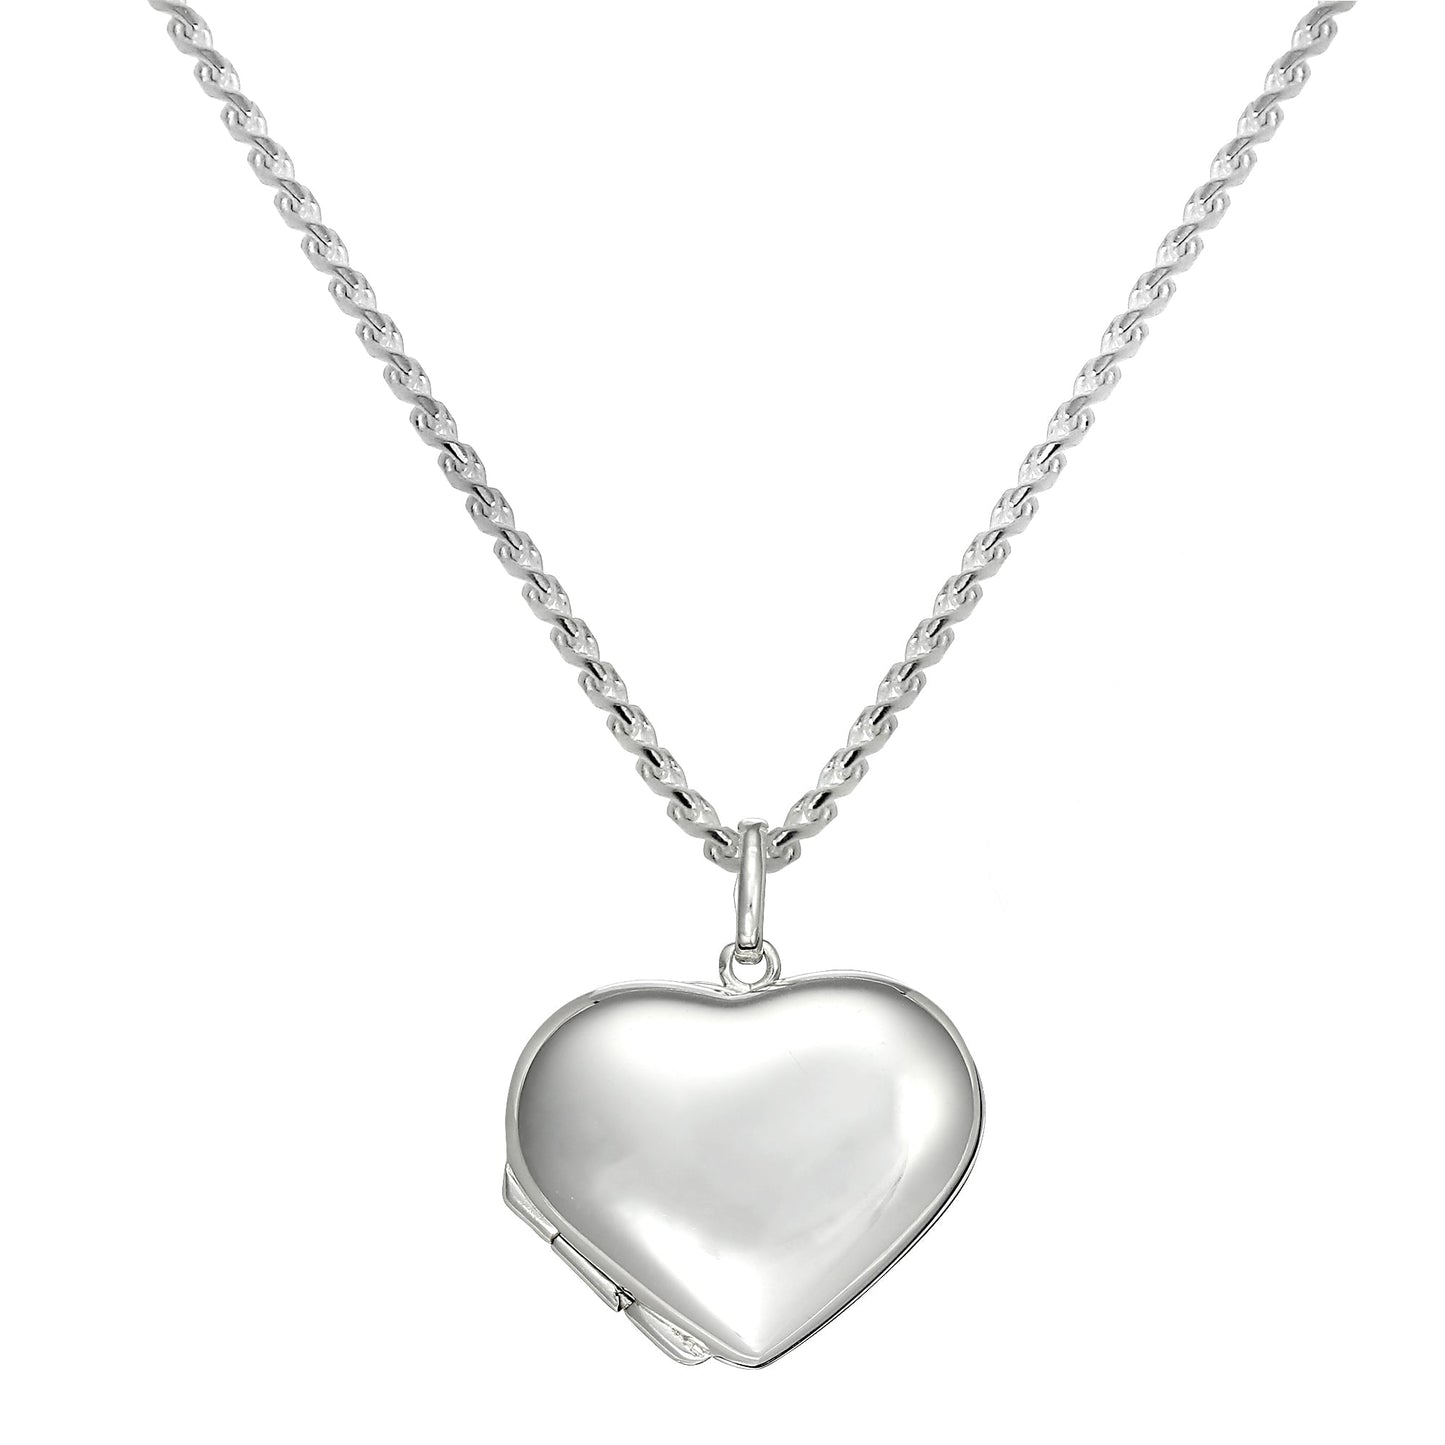 Large Sterling Silver Puffed Heart Locket Pendant Necklace 16 - 22 Inches